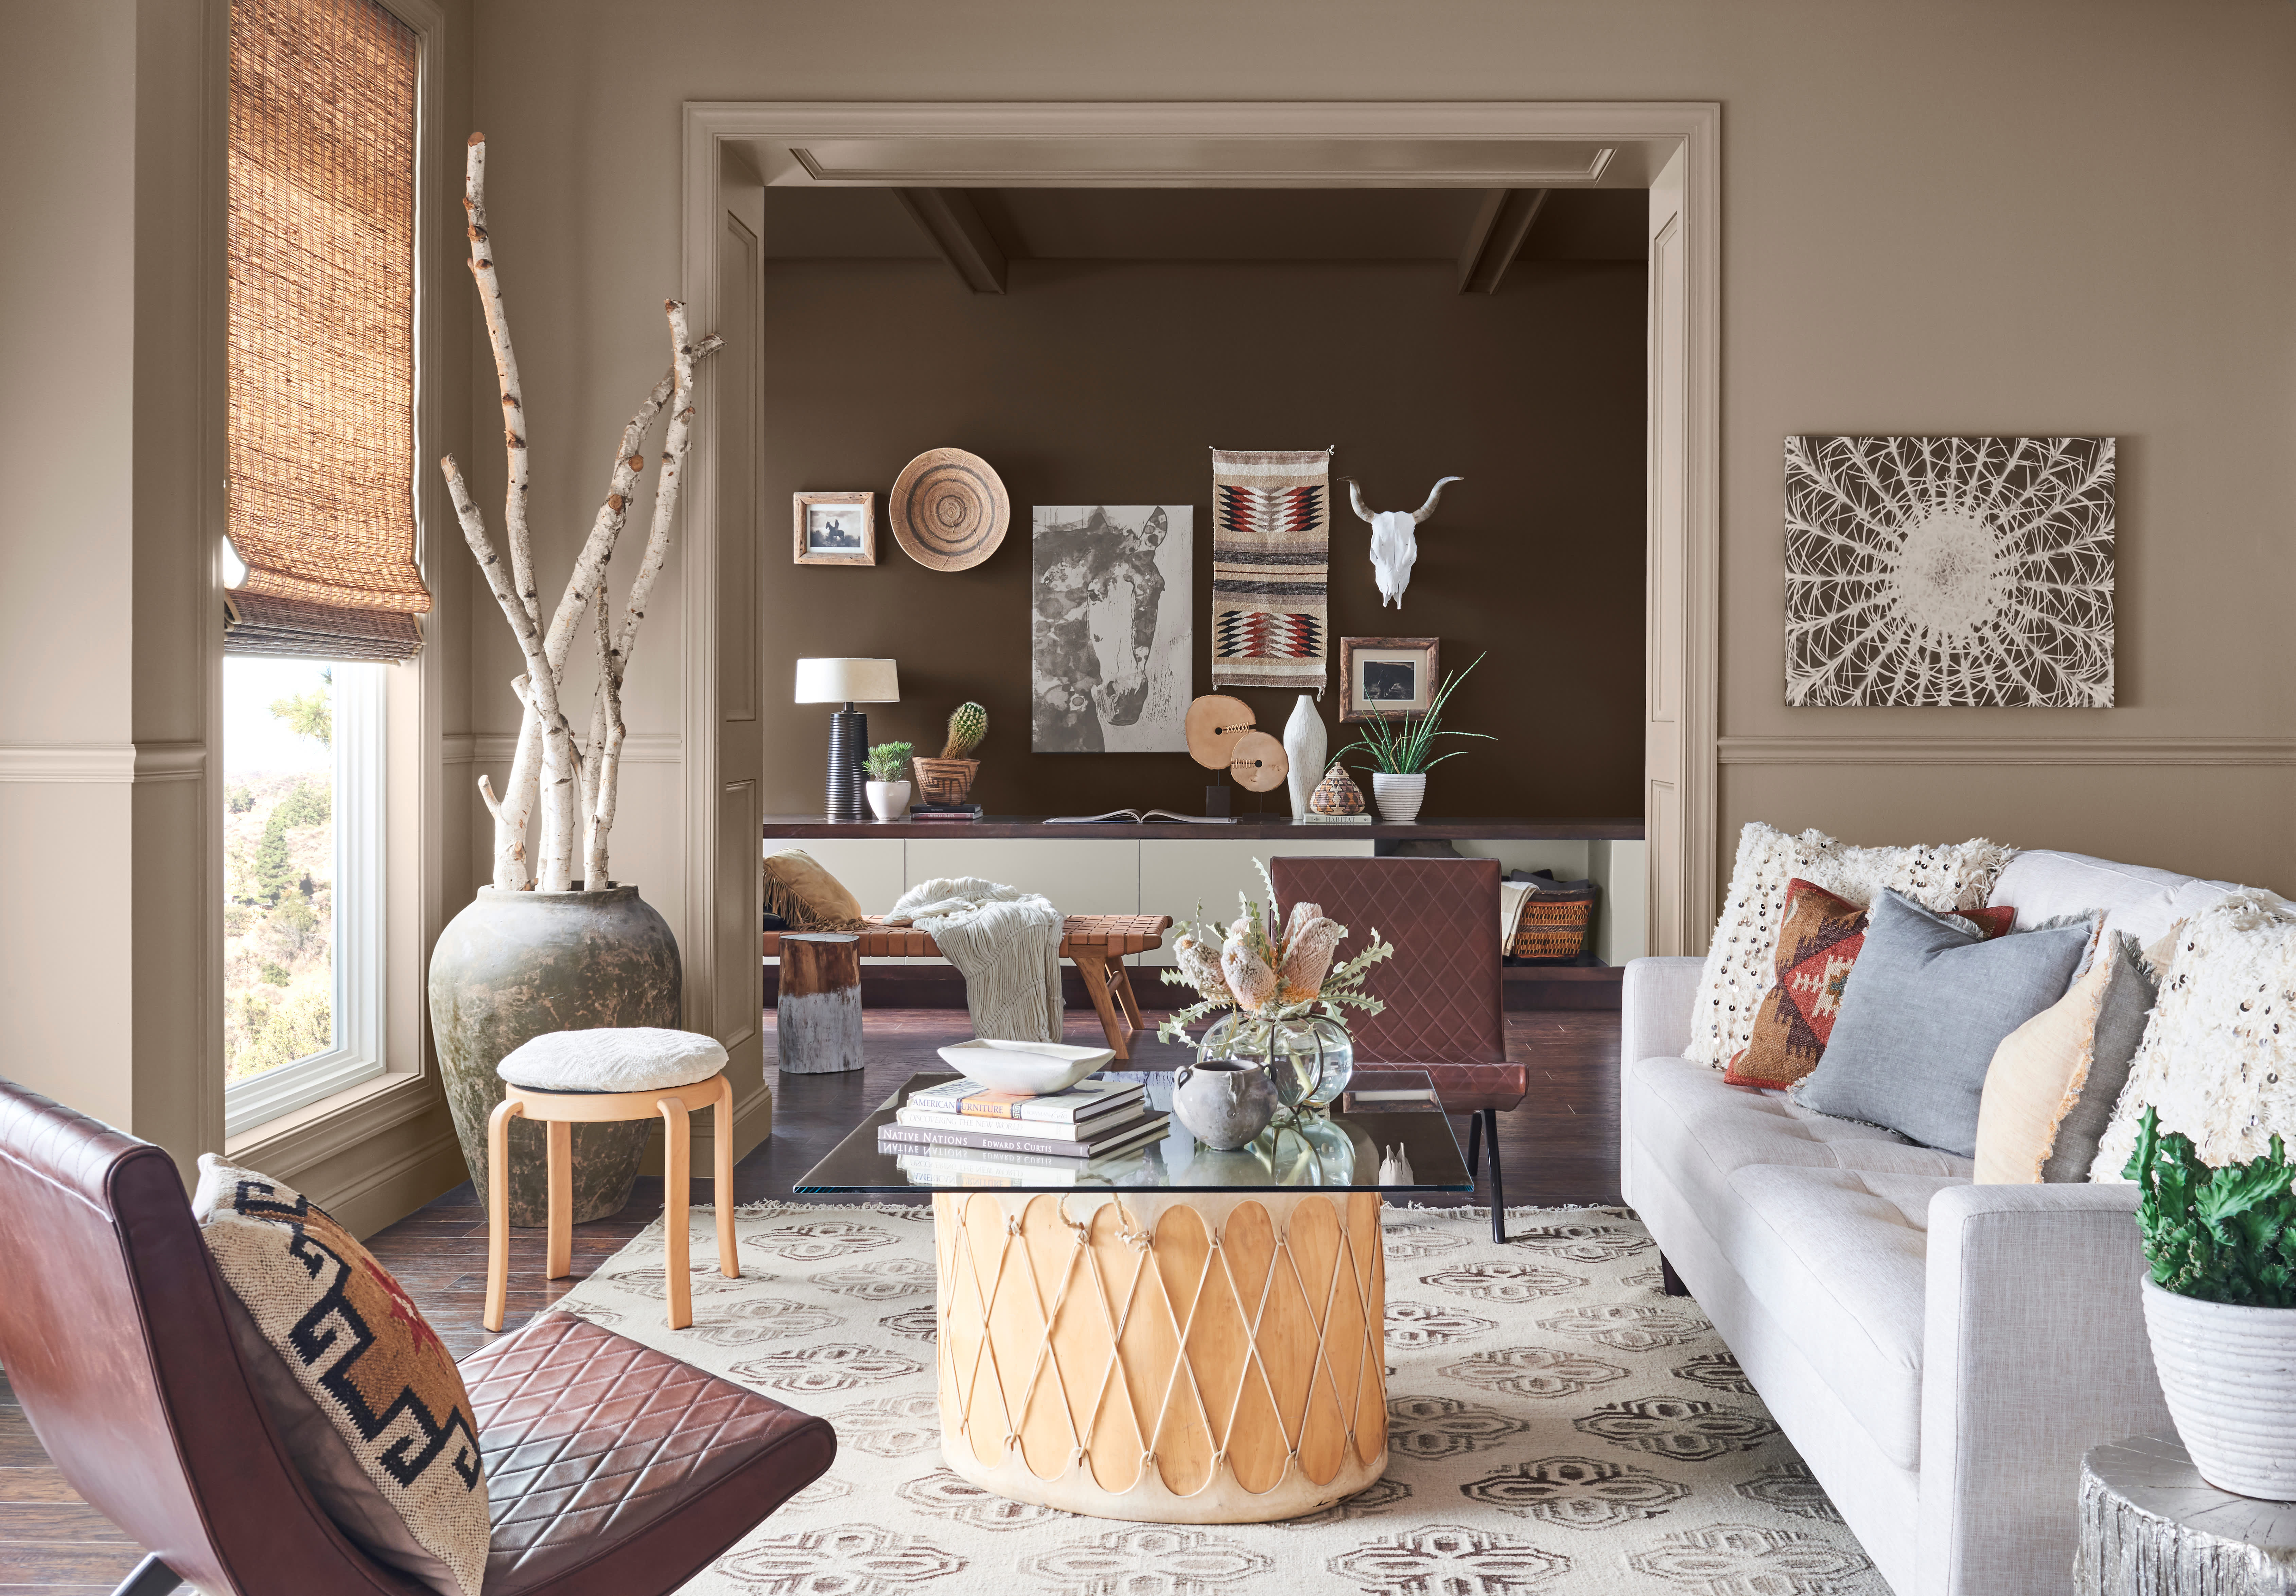 These are the 15 Best Beige Paint Colors